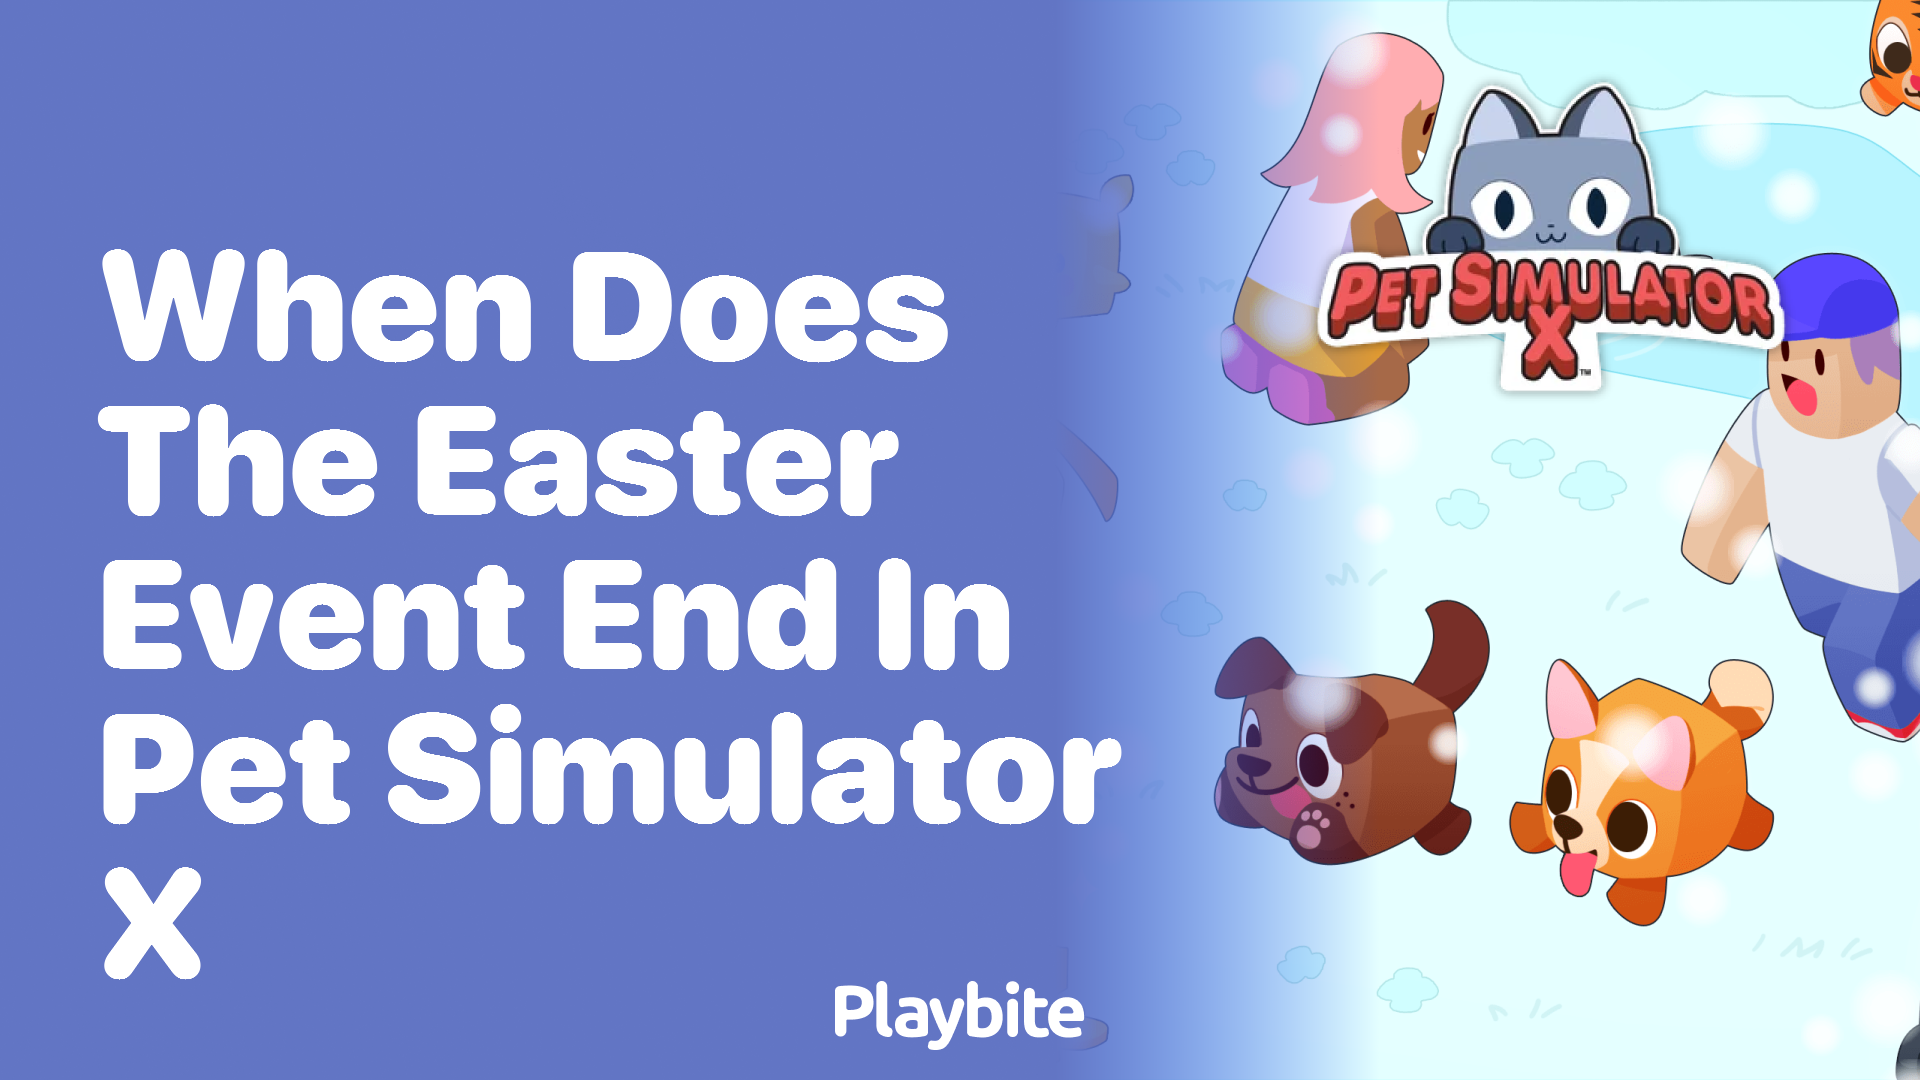 When Does the Easter Event End in Pet Simulator X?